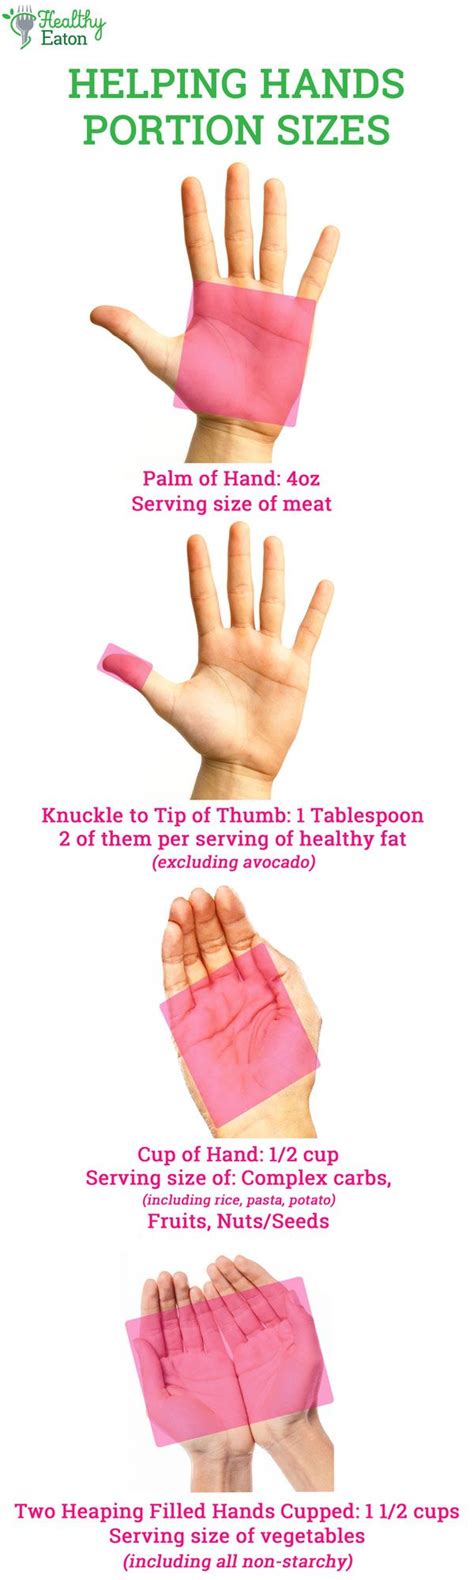 Quick Guide Using Hands To Help With Serving Size Portion Control To